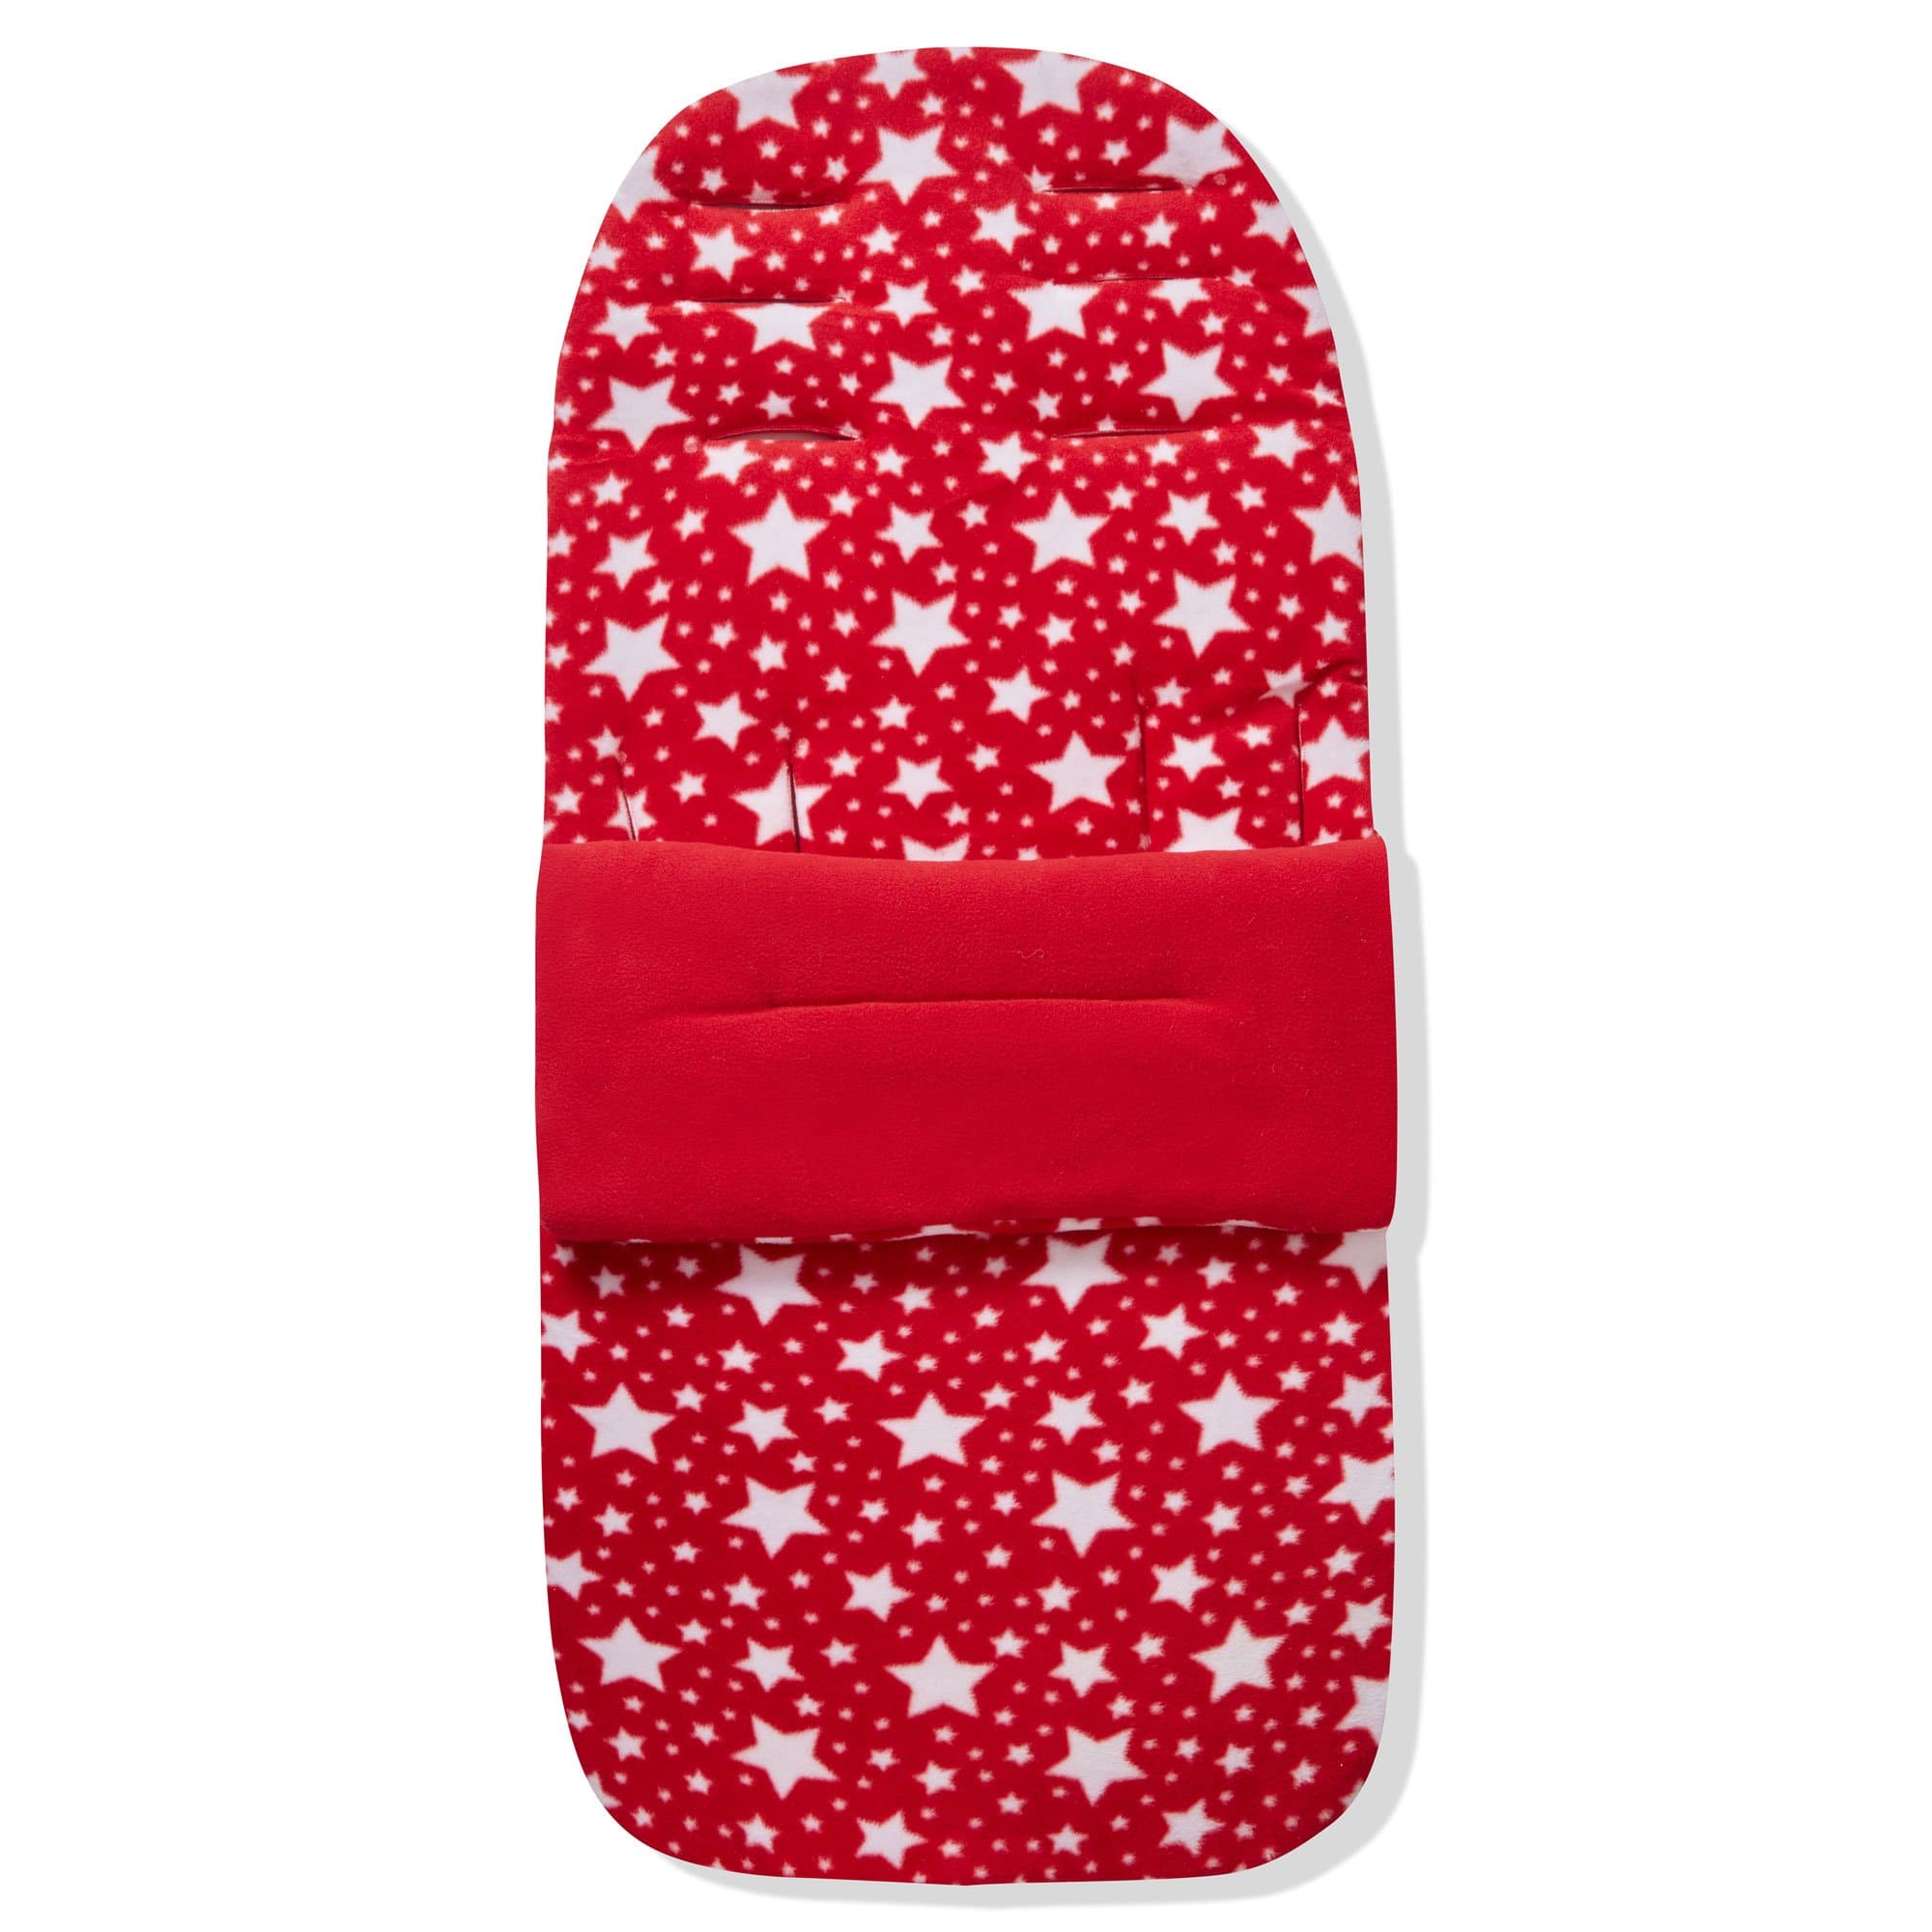 Fleece Footmuff / Cosy Toes Compatible with Babyzen - For Your Little One